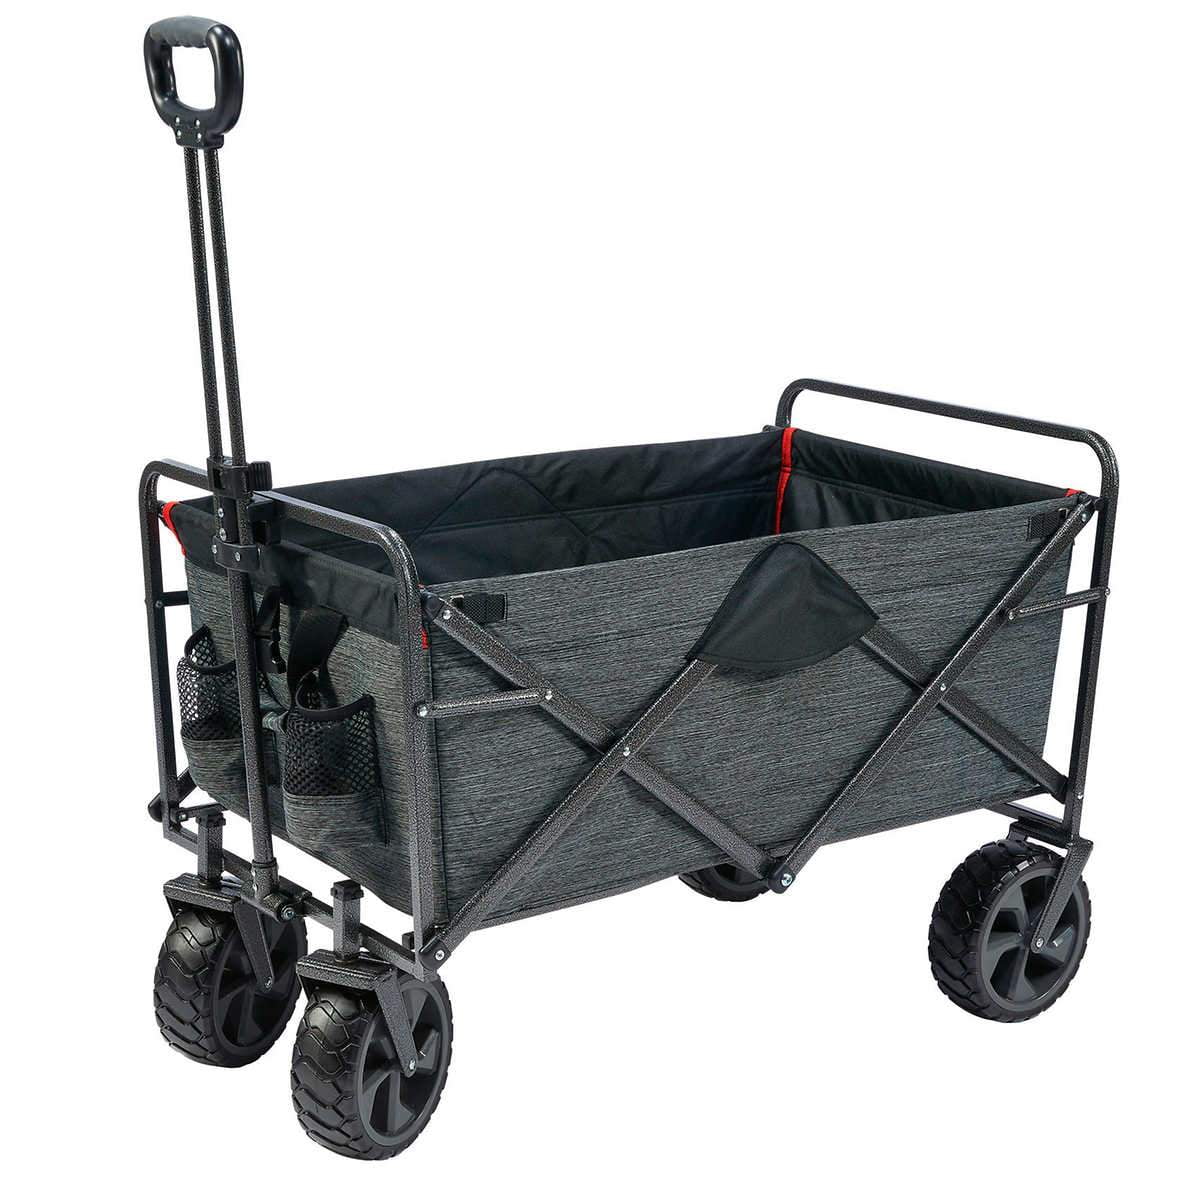 Certified Refurbished Mac Sports WTC-145 Collapsible Outdoor Folding Wagon Black 